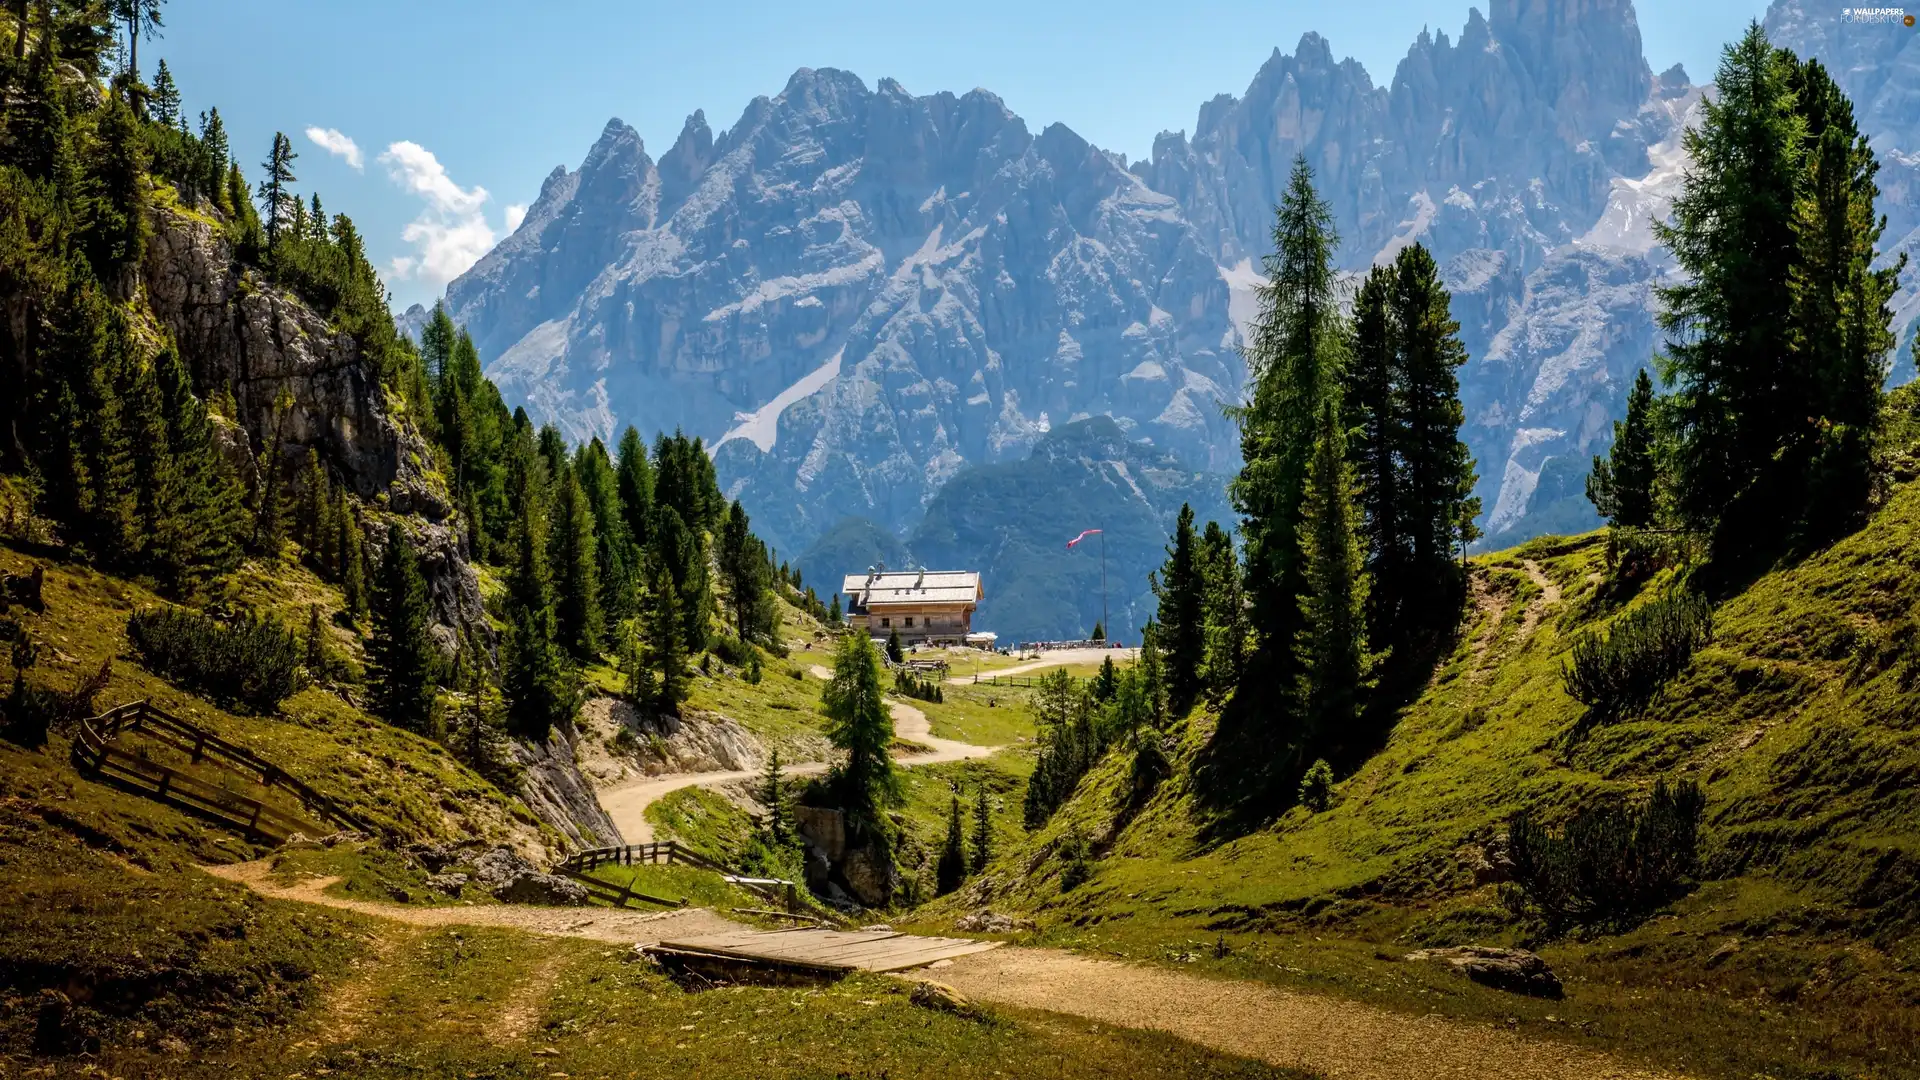 strand, Dolomites, mountain, Alps, viewes, Italy, Way, trees, house